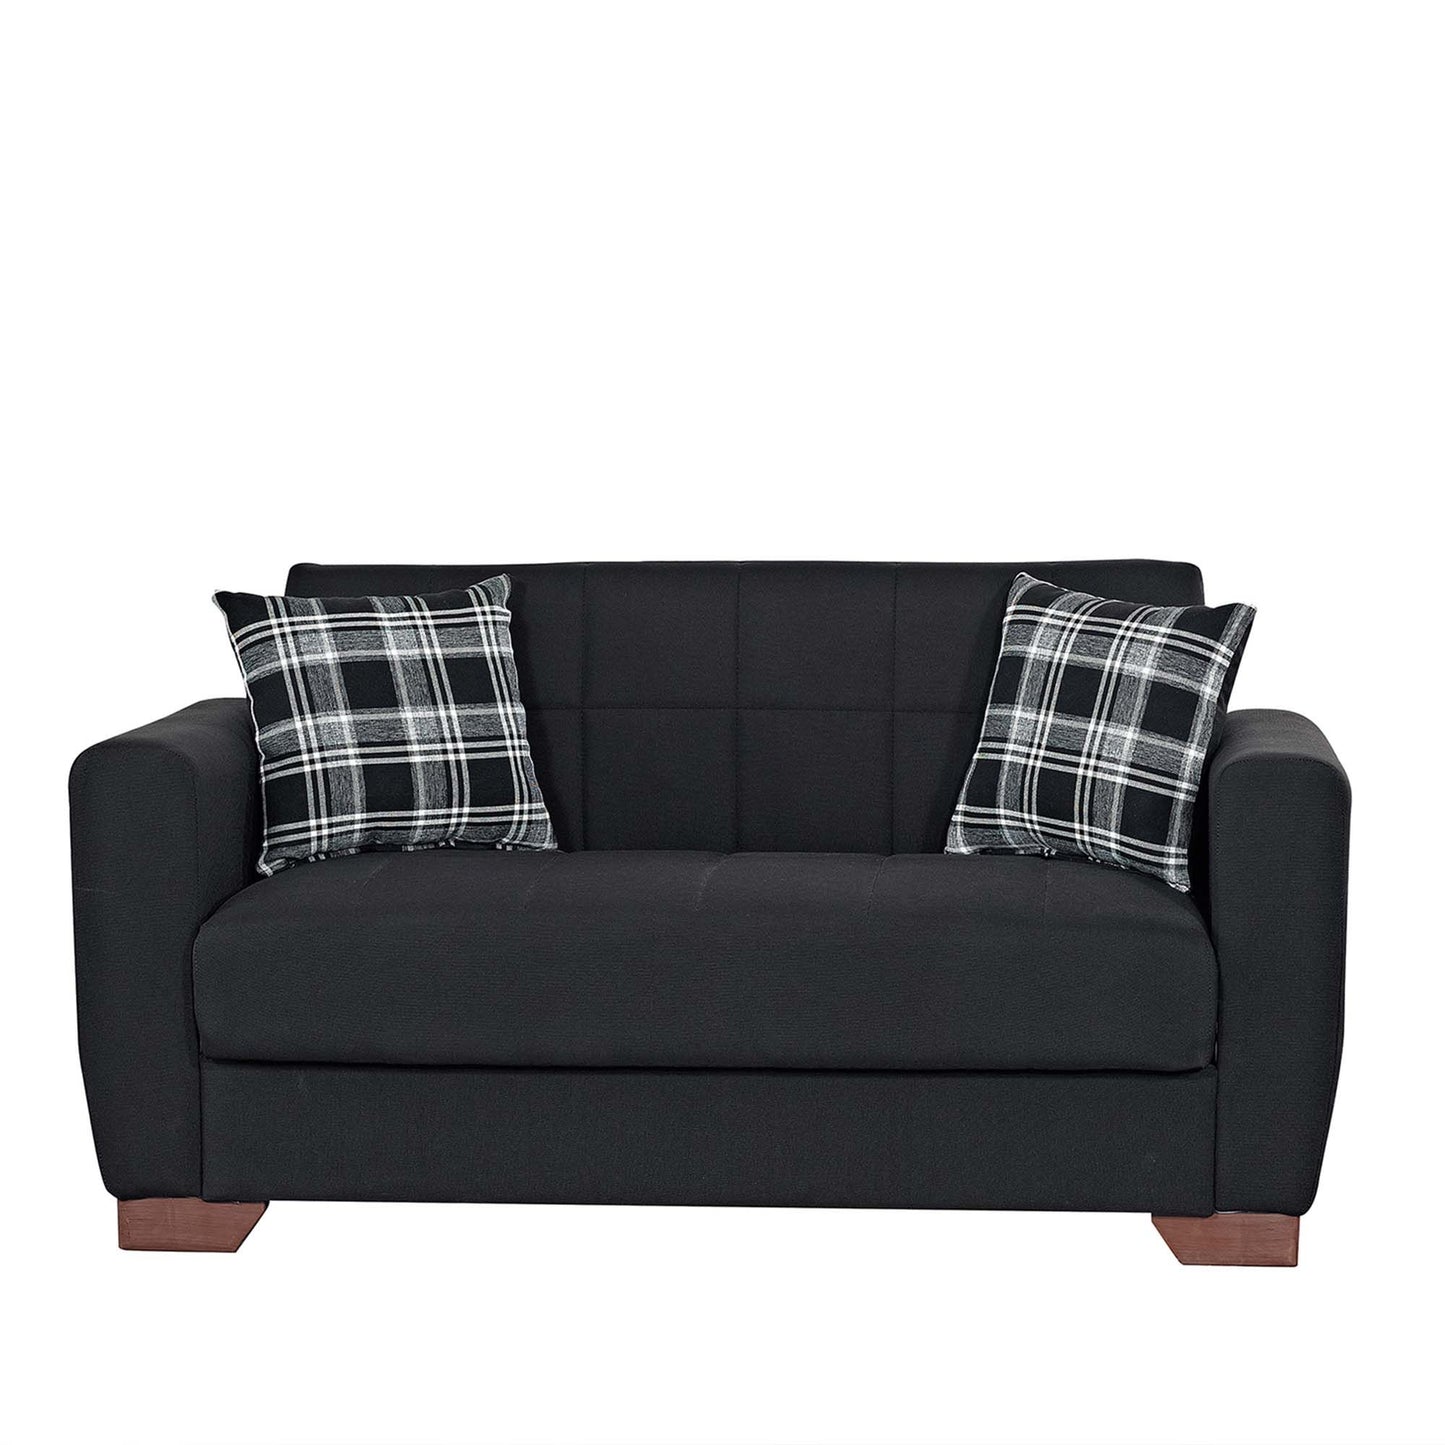 52" Black Brown Chenille Futon Convertible Sleeper Love Seat With Storage And Toss Pillows